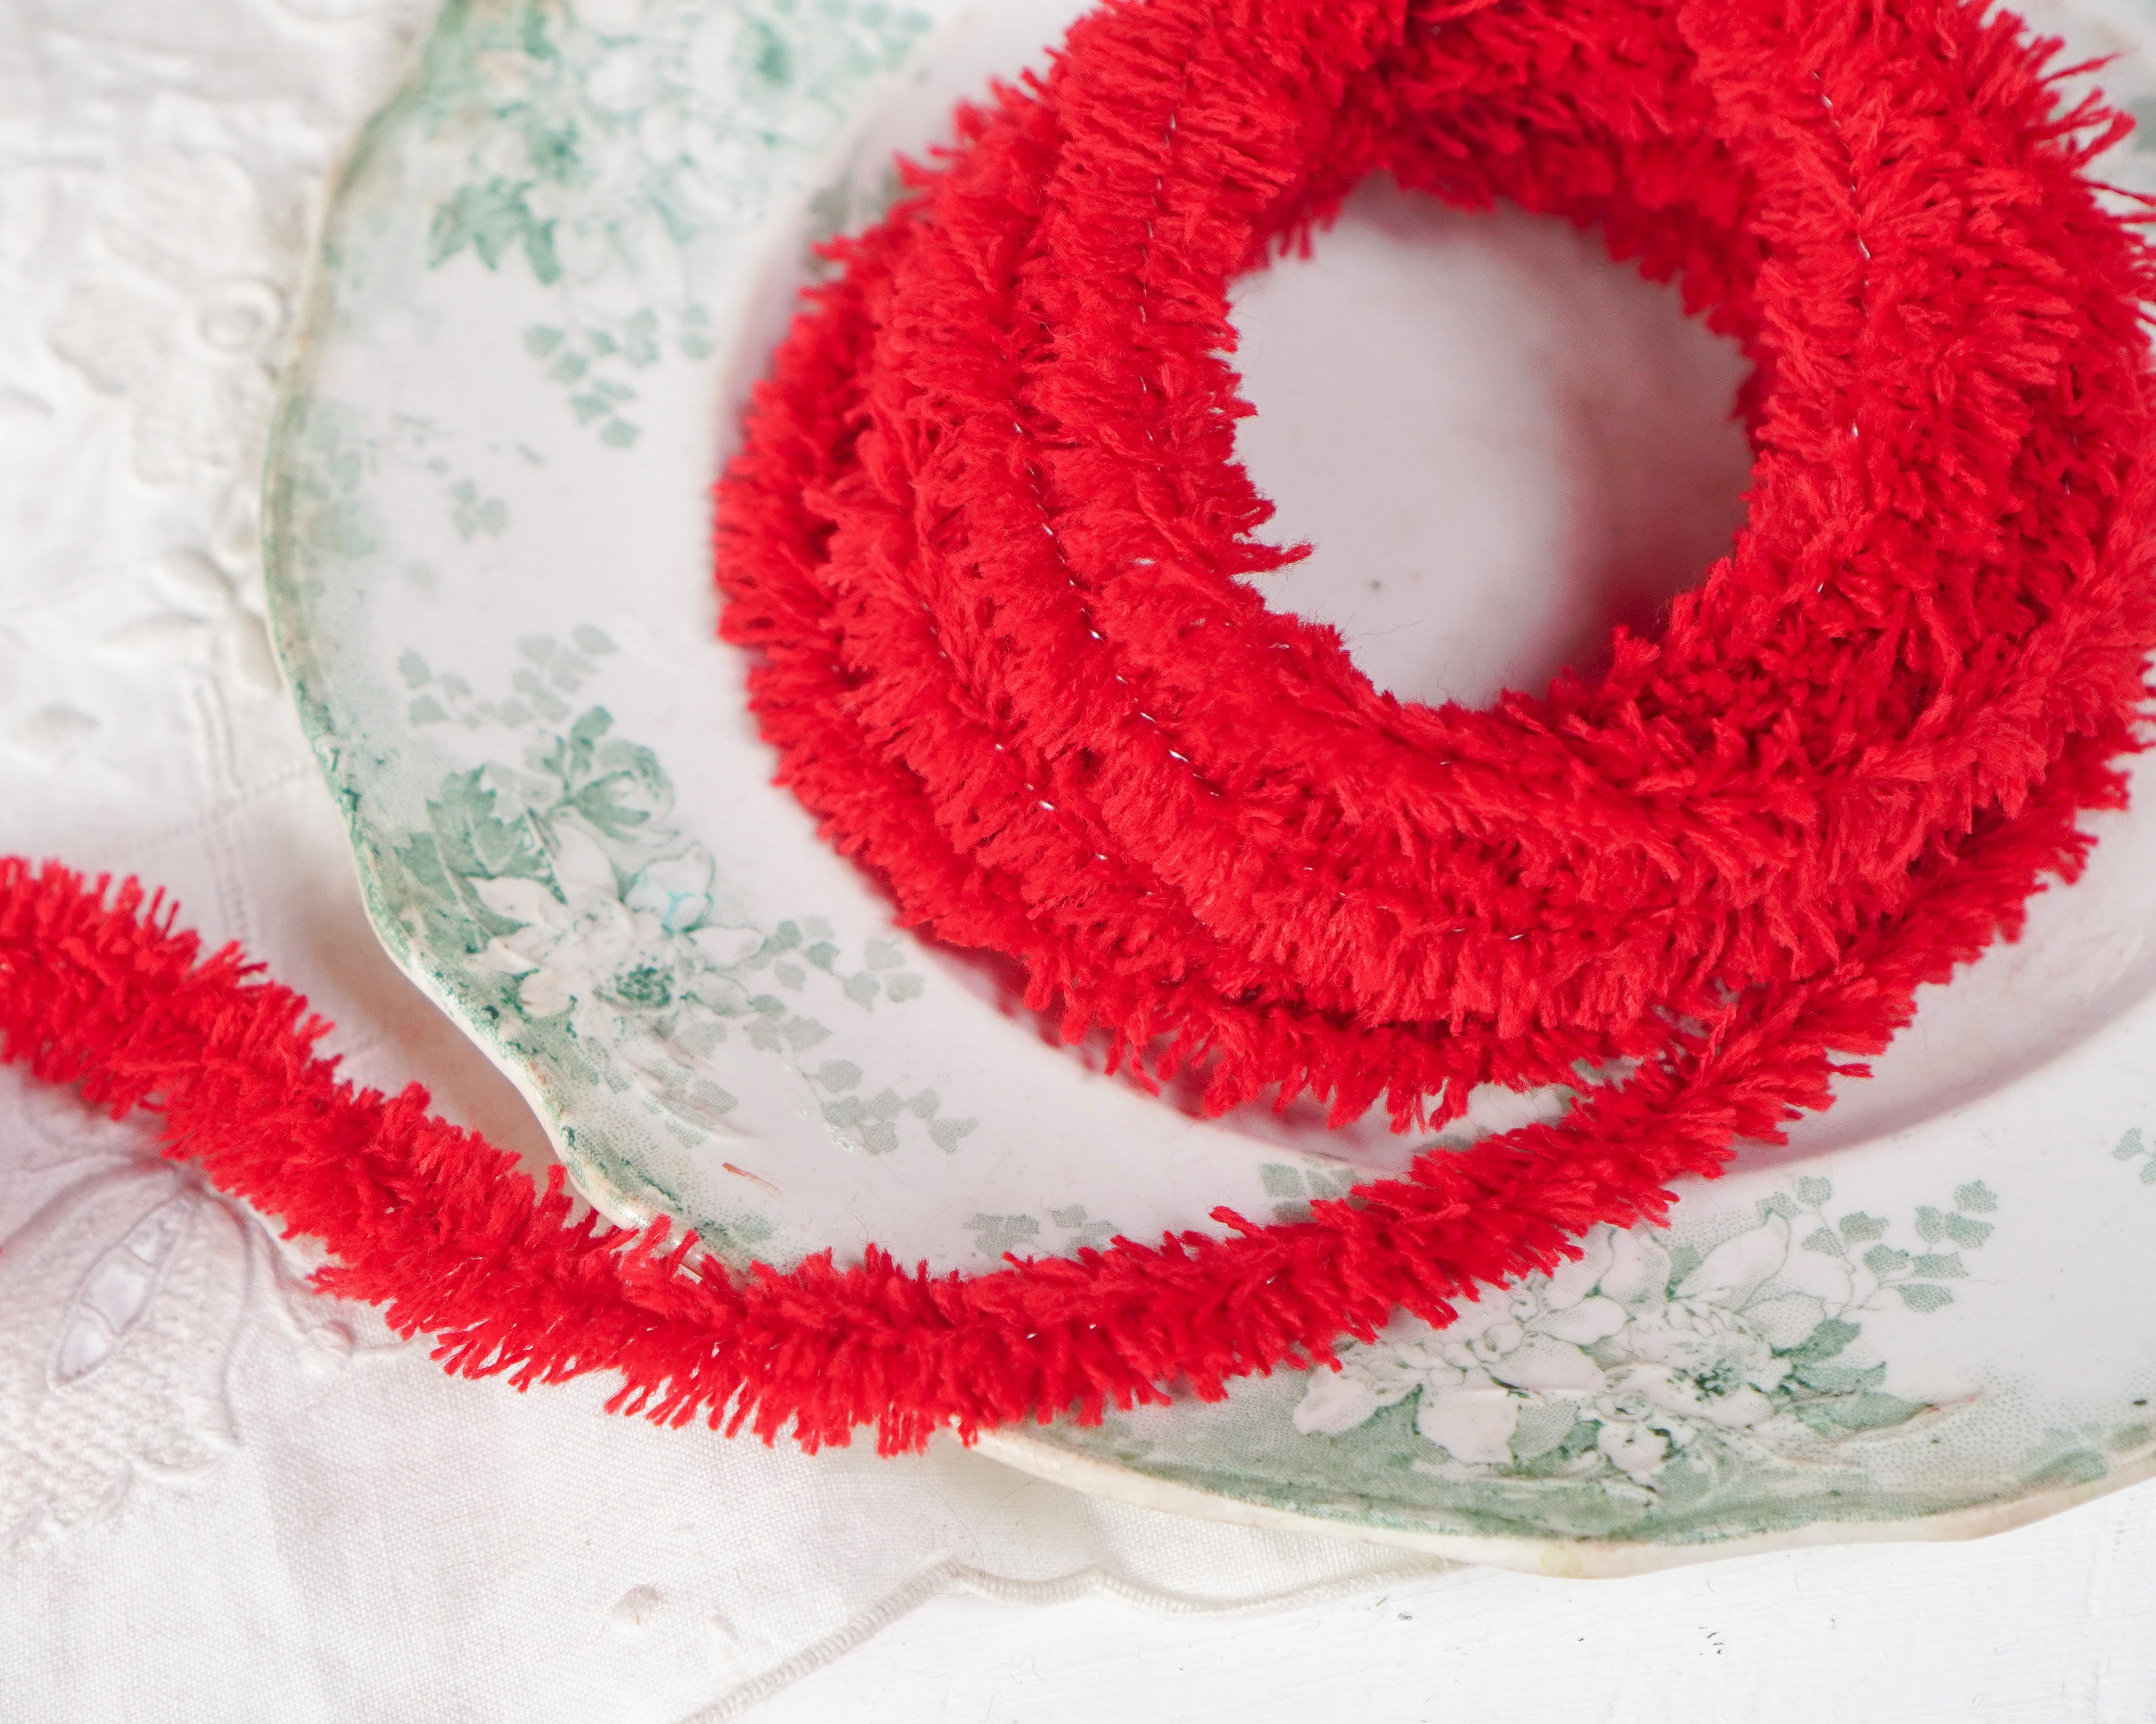 Wired Yarn Trim - Fluffy Christmas Red Yarn Fur Craft Cord, 3 Yds. – Smile  Mercantile Craft Co.